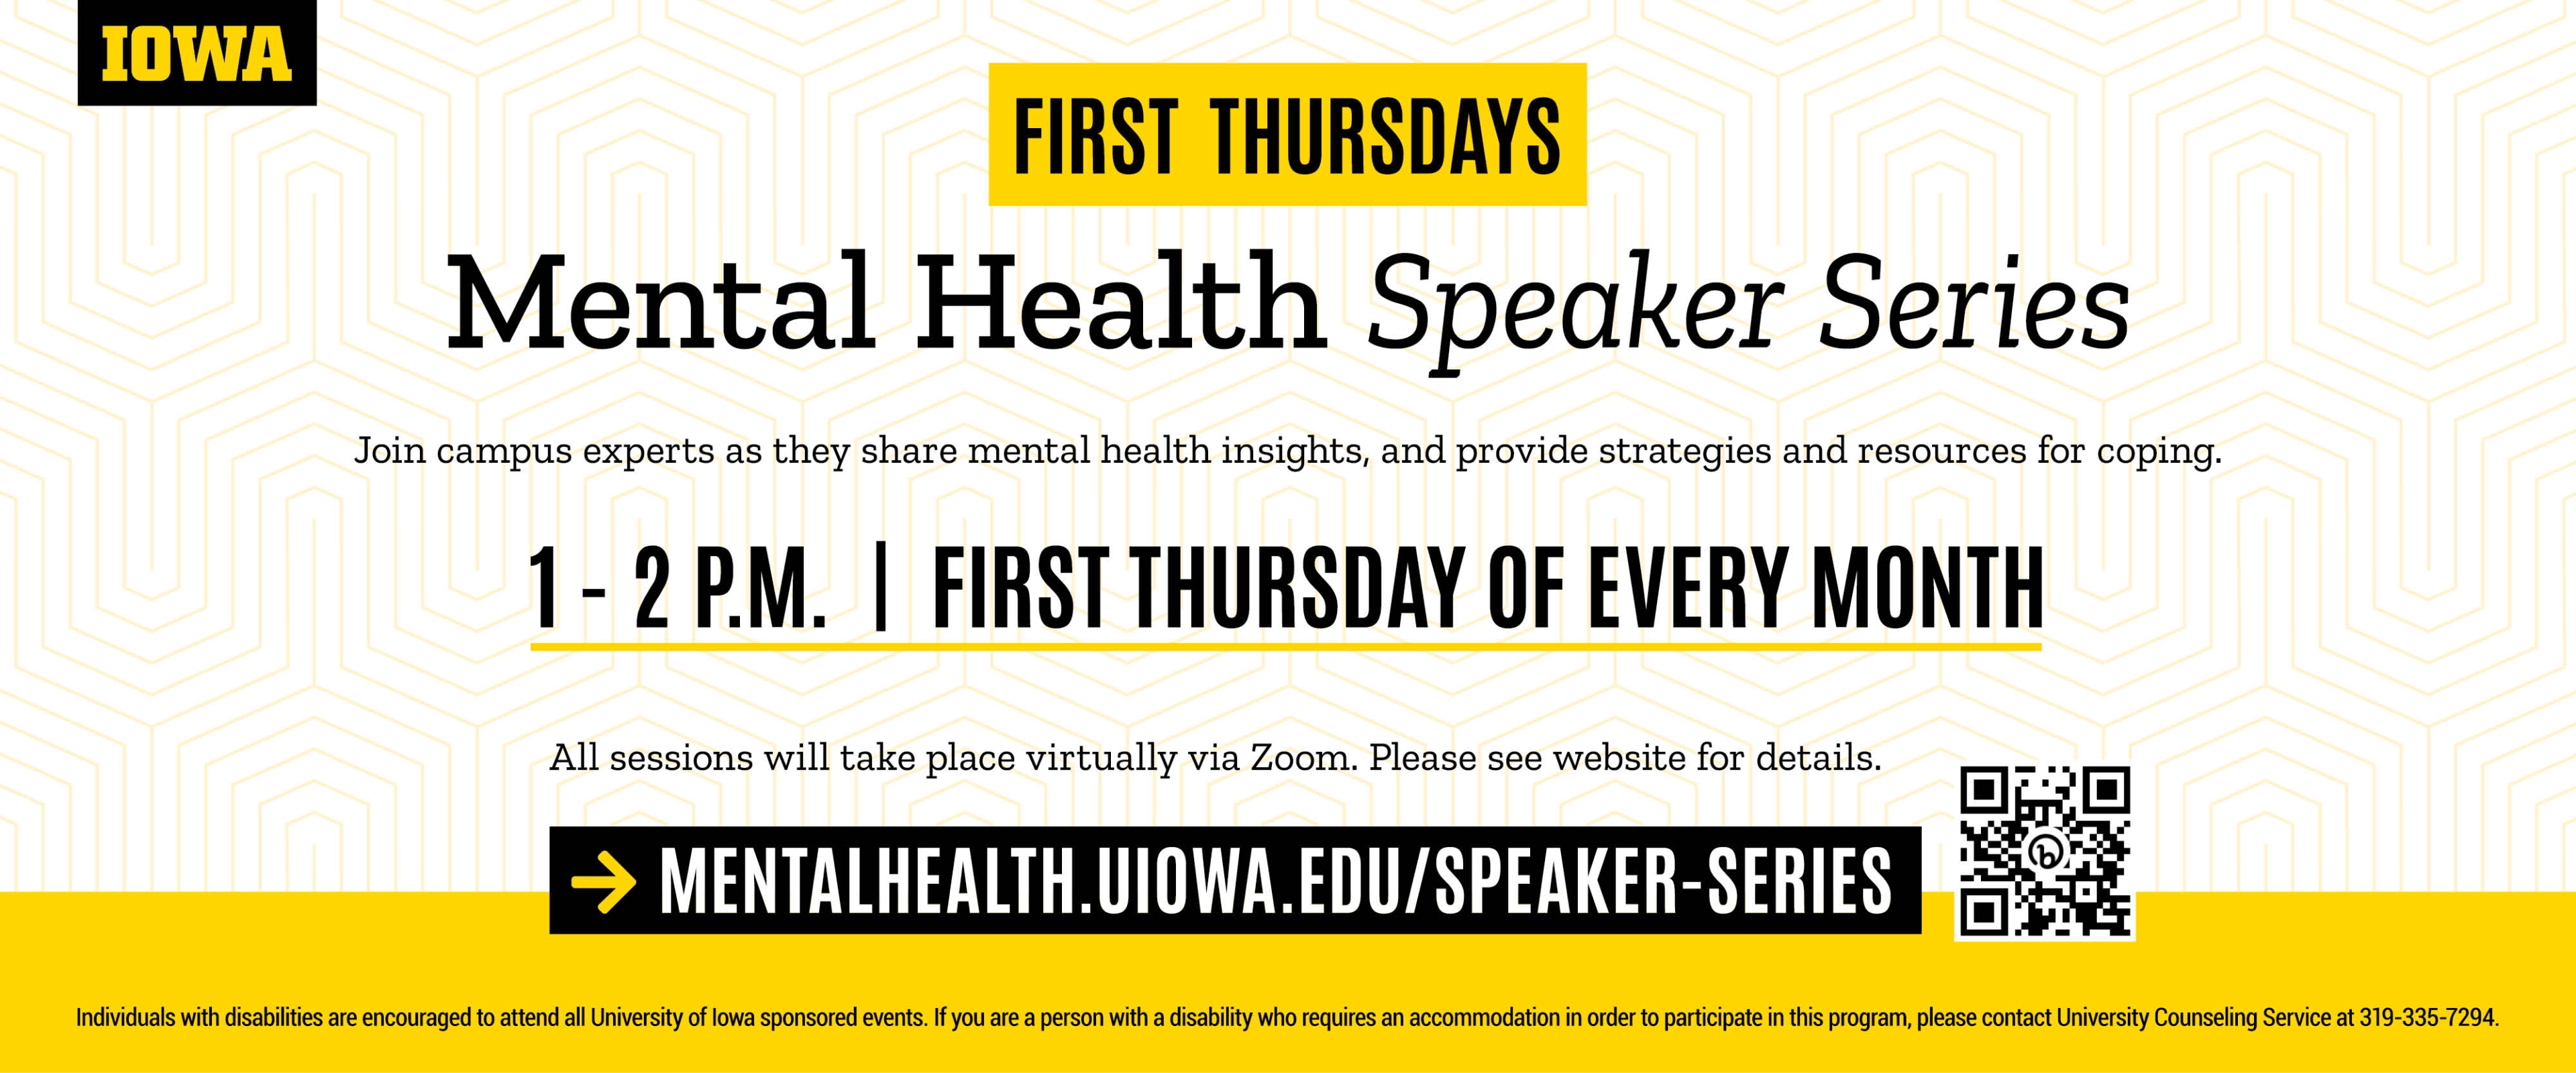 Mental Health Speaker Series 1-2 pm first Thursday every month